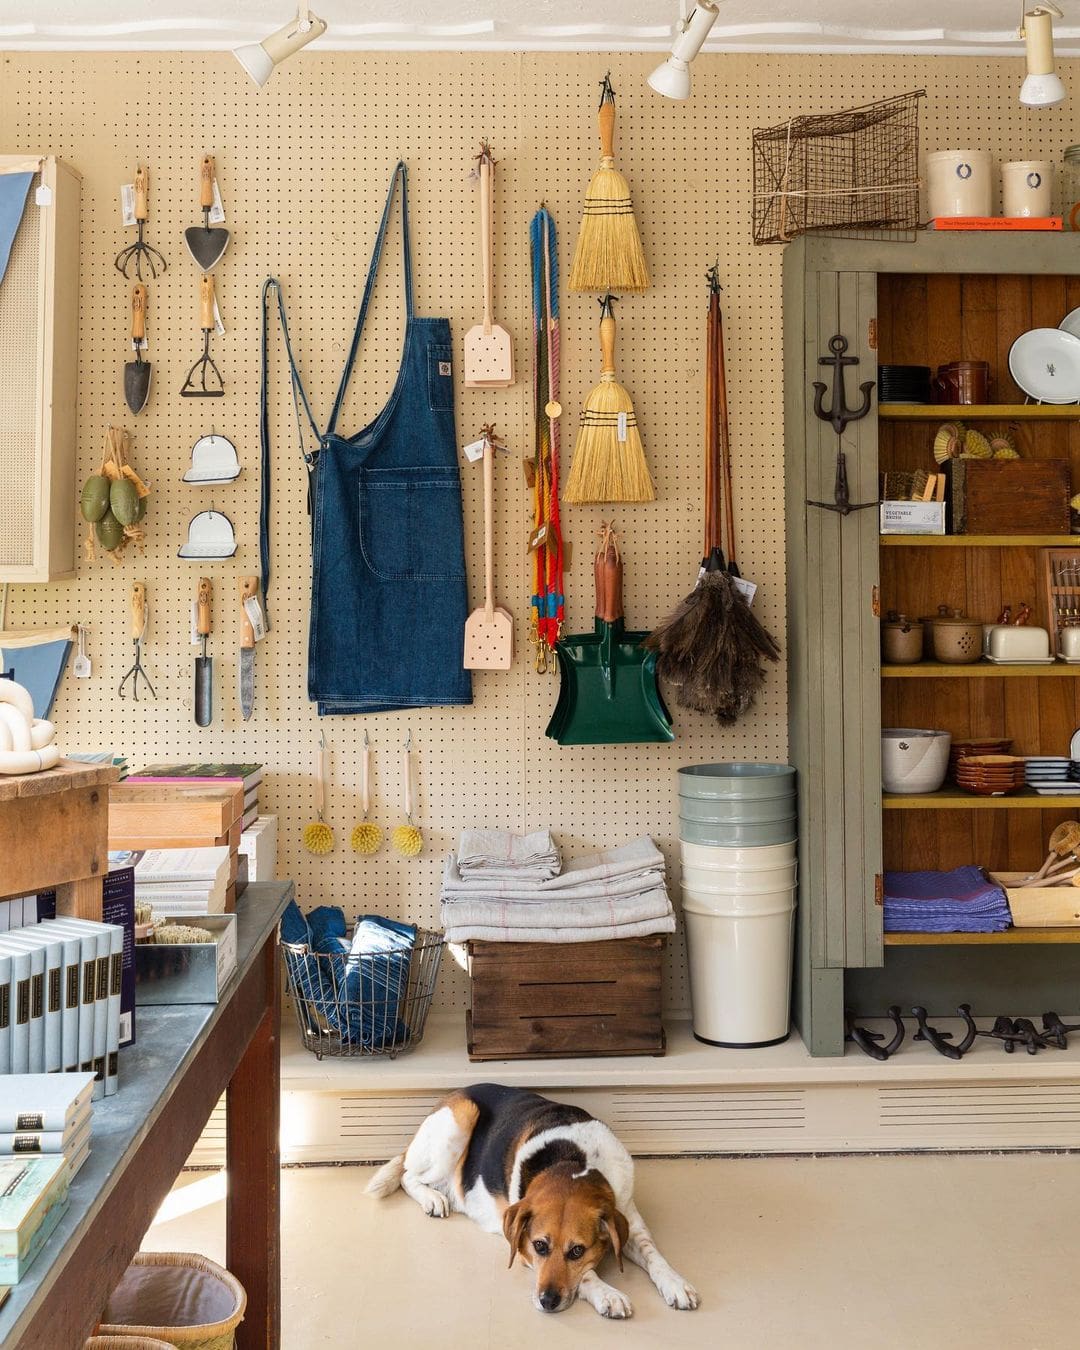 The best shops in Hudson NY | utilitarian homeware at Clove & Creek